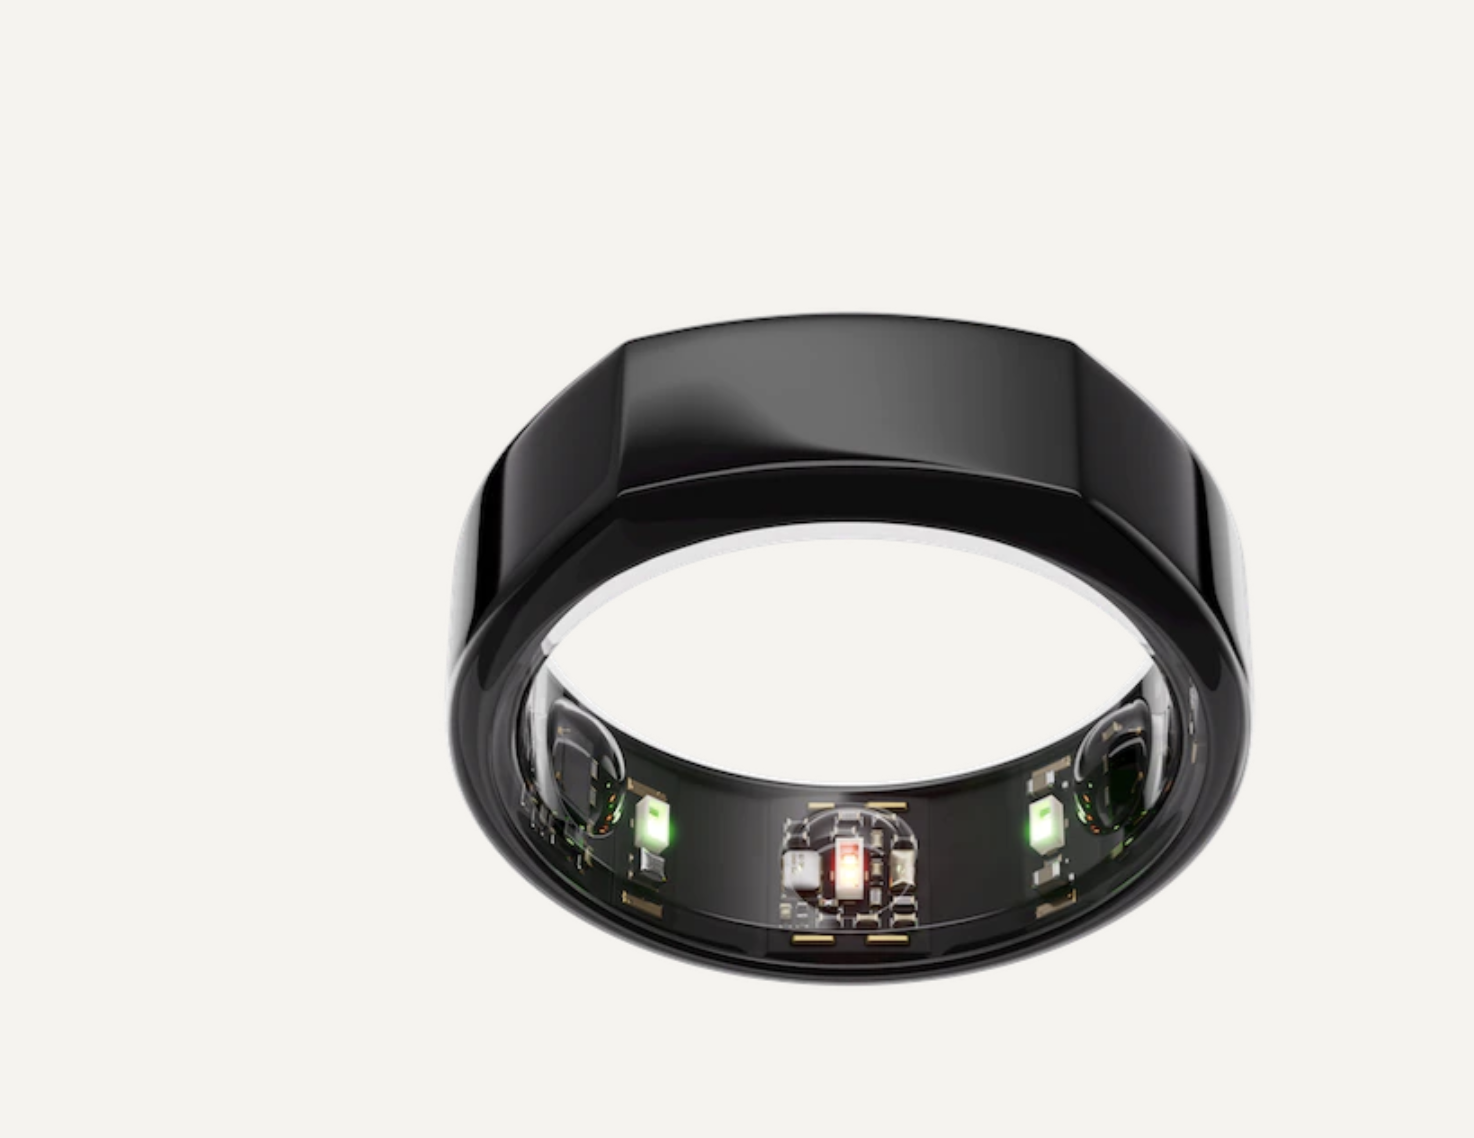 Oura Ring vs Fitbit | Fitbit, Fitbit watch, Rings